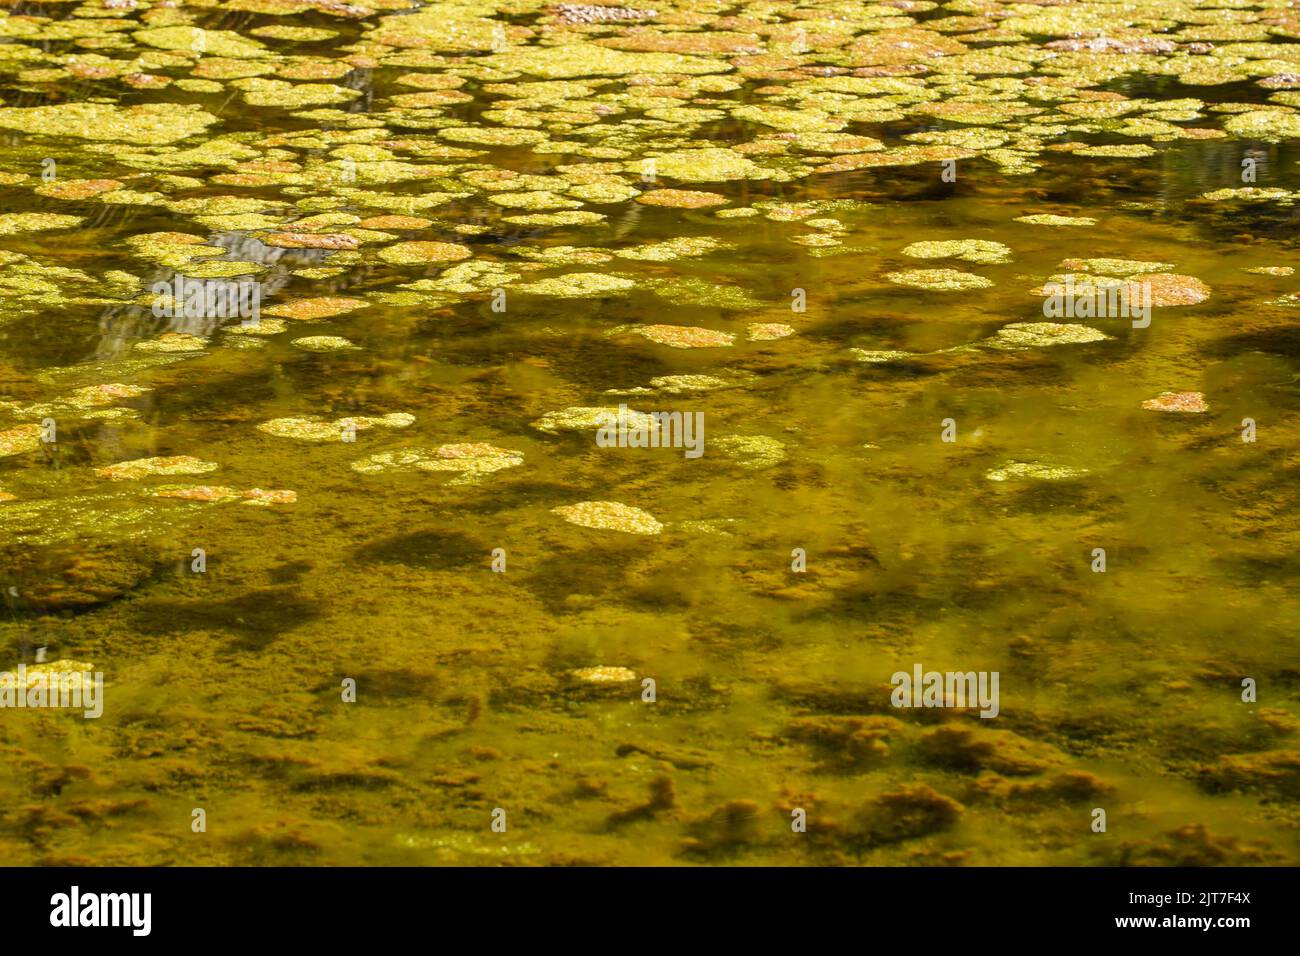 Blooming Green algae and Brown Algae on stagnated water surface in a river. Stock Photo